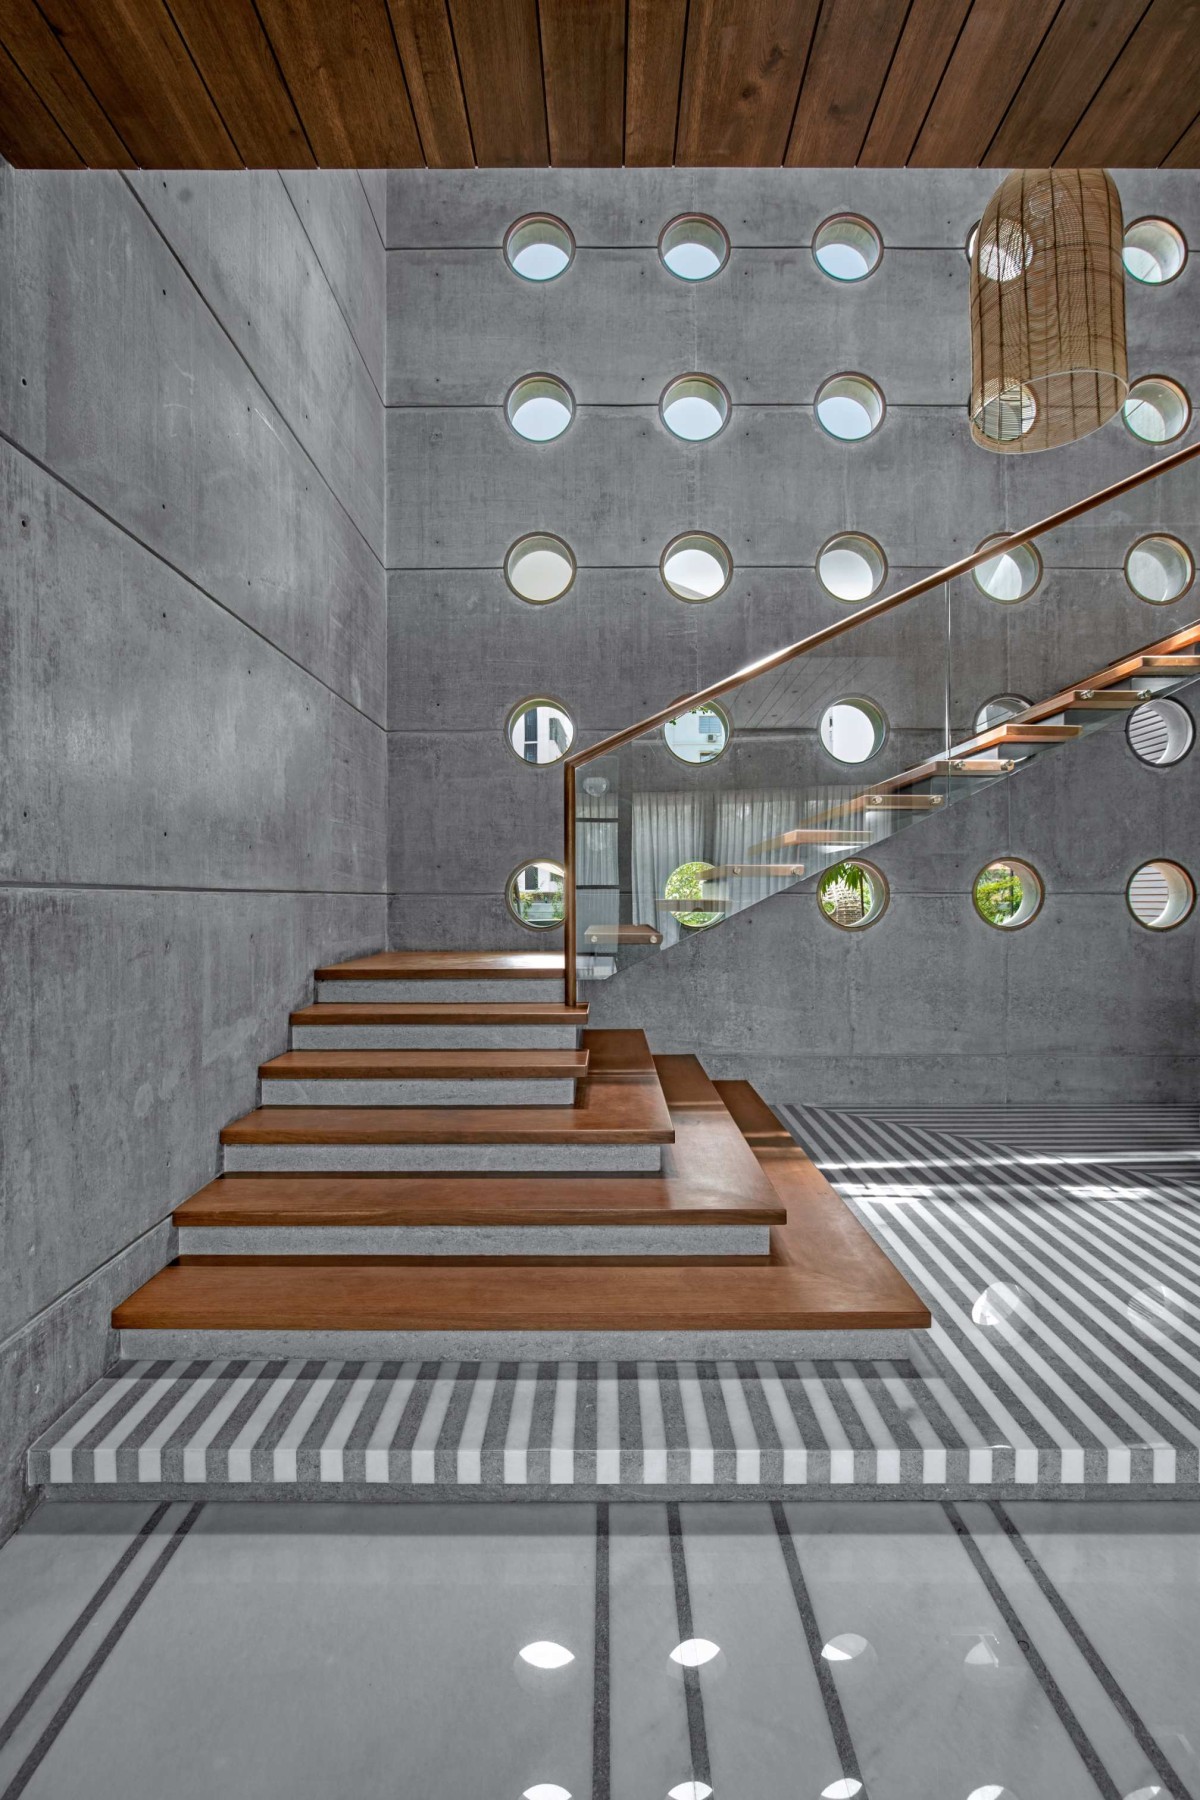 Staircase of Ankit Shah Residence by Dipen Gada & Associates